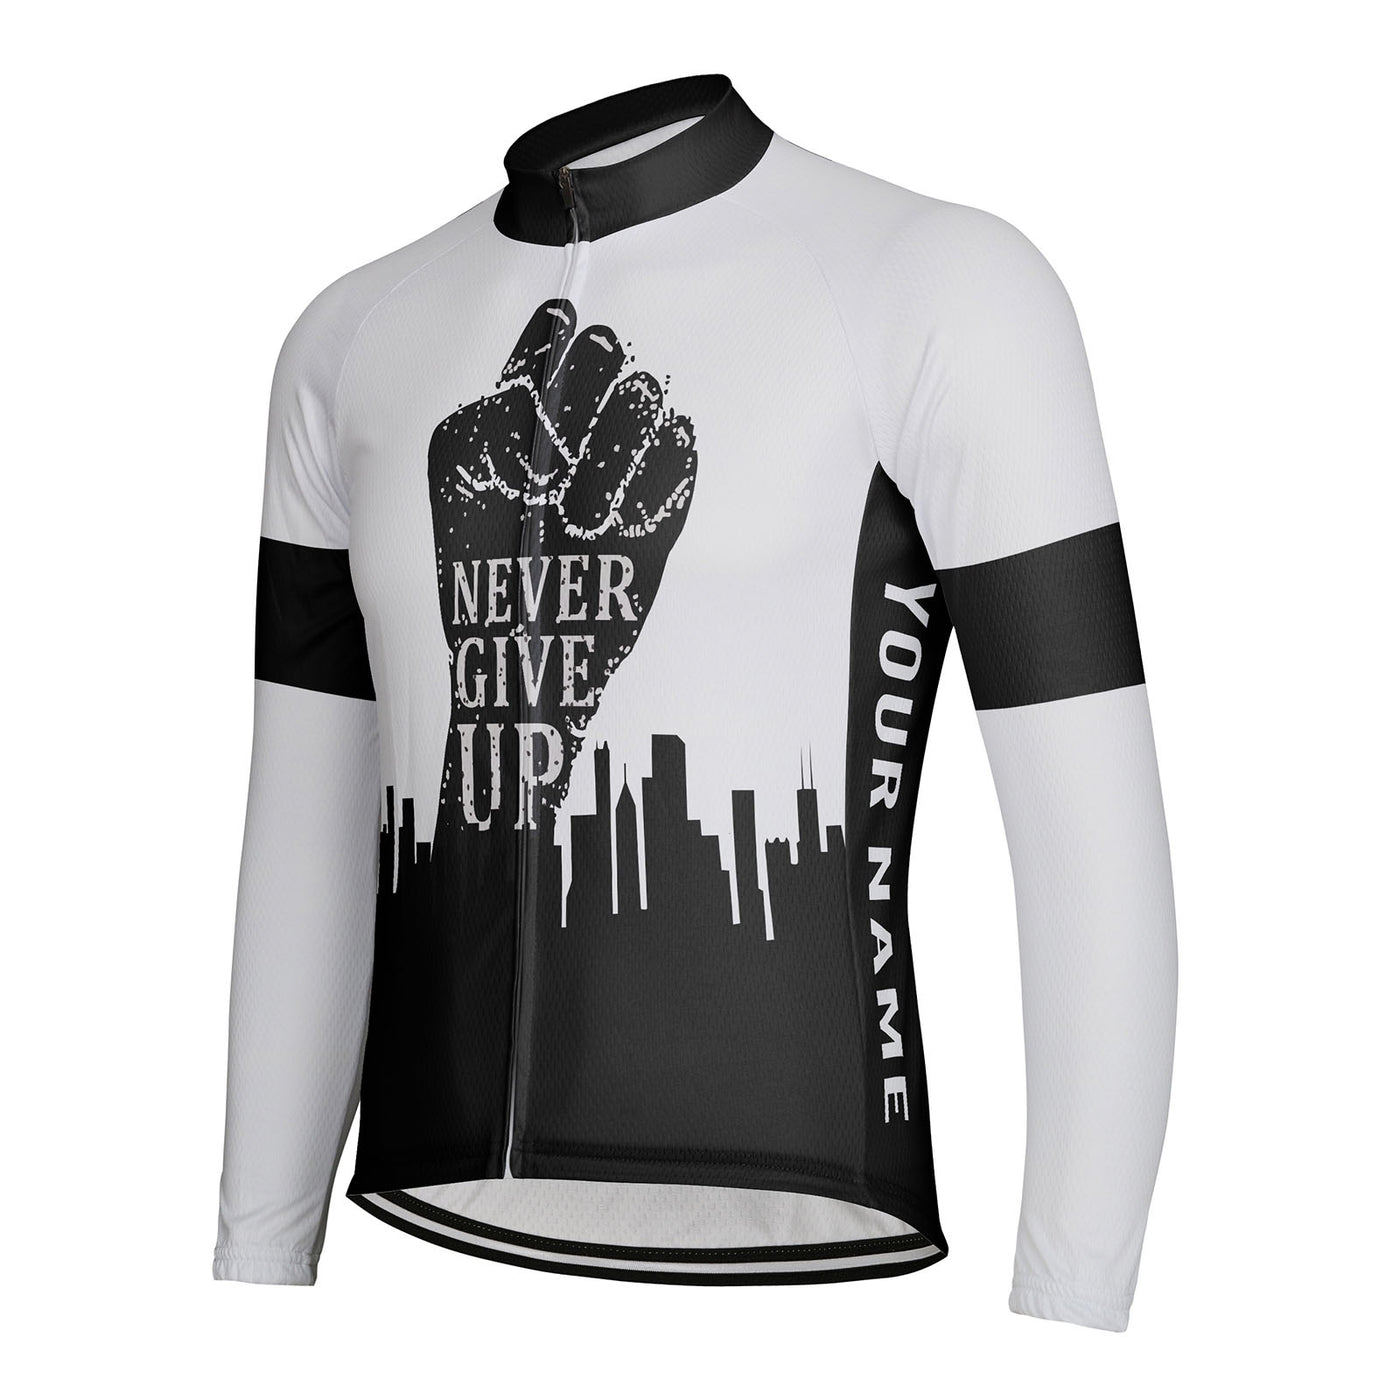 Customized Never Give Up Men's Cycling Jersey Long Sleeve